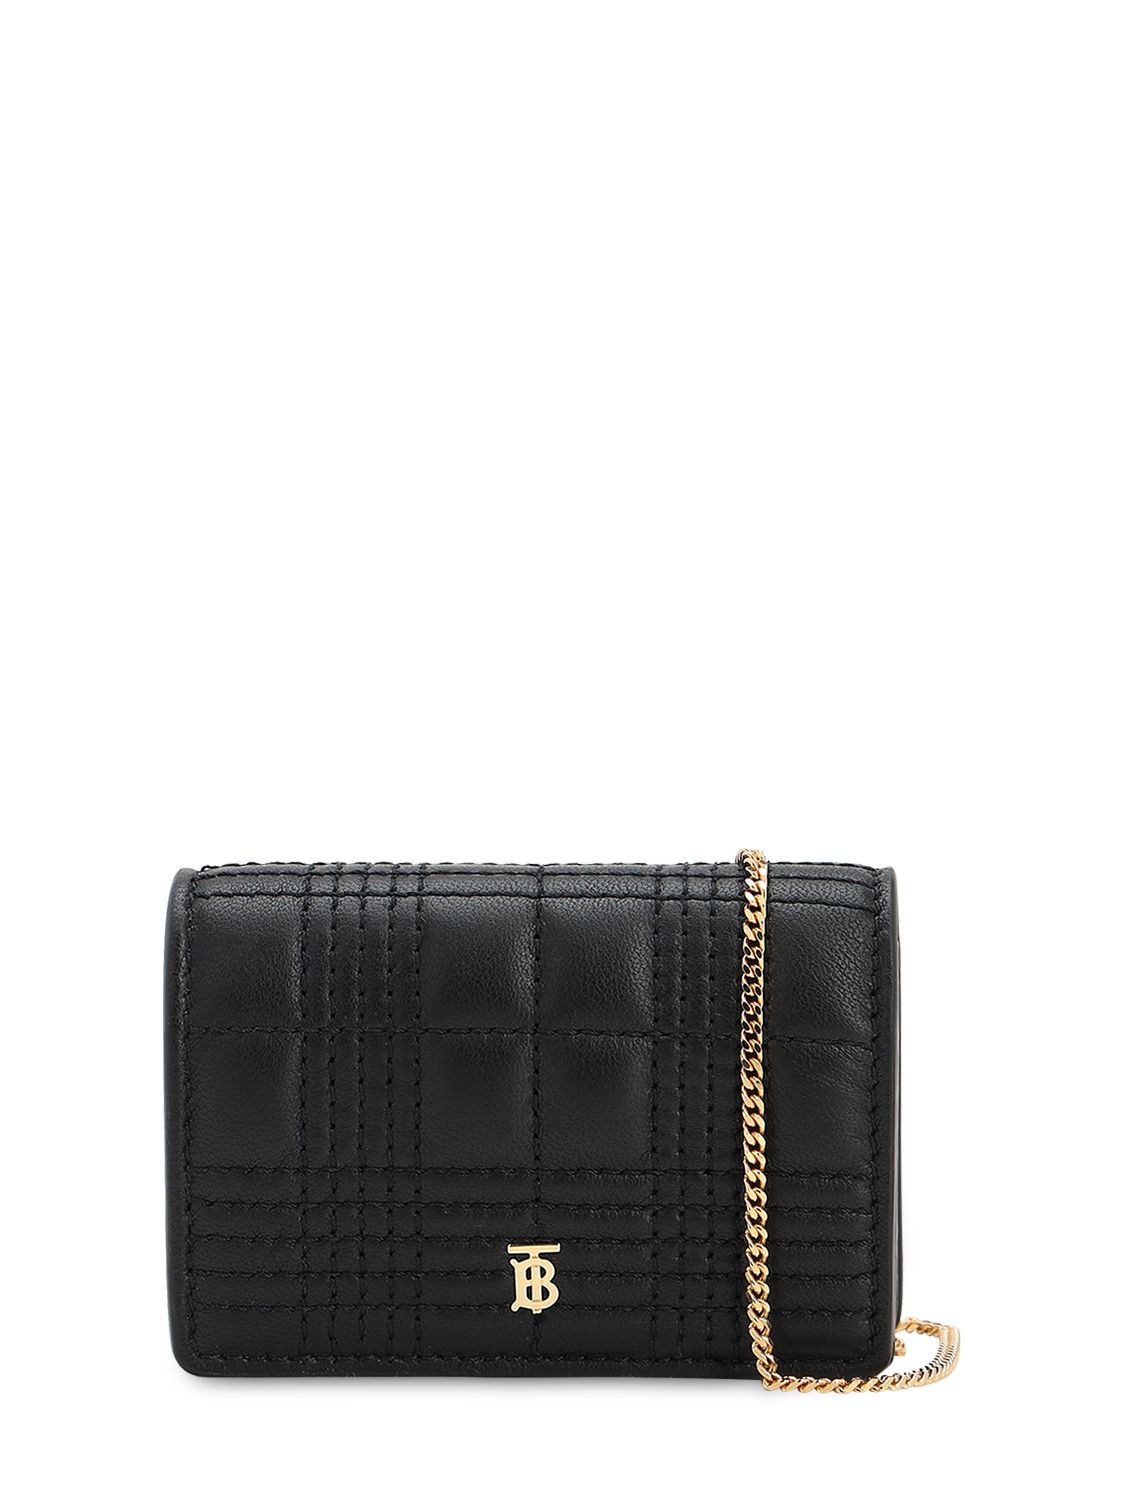 BURBERRY JESSIE QUILTED LEATHER CHAIN WALLET,71ID1H040-QTEXODK1